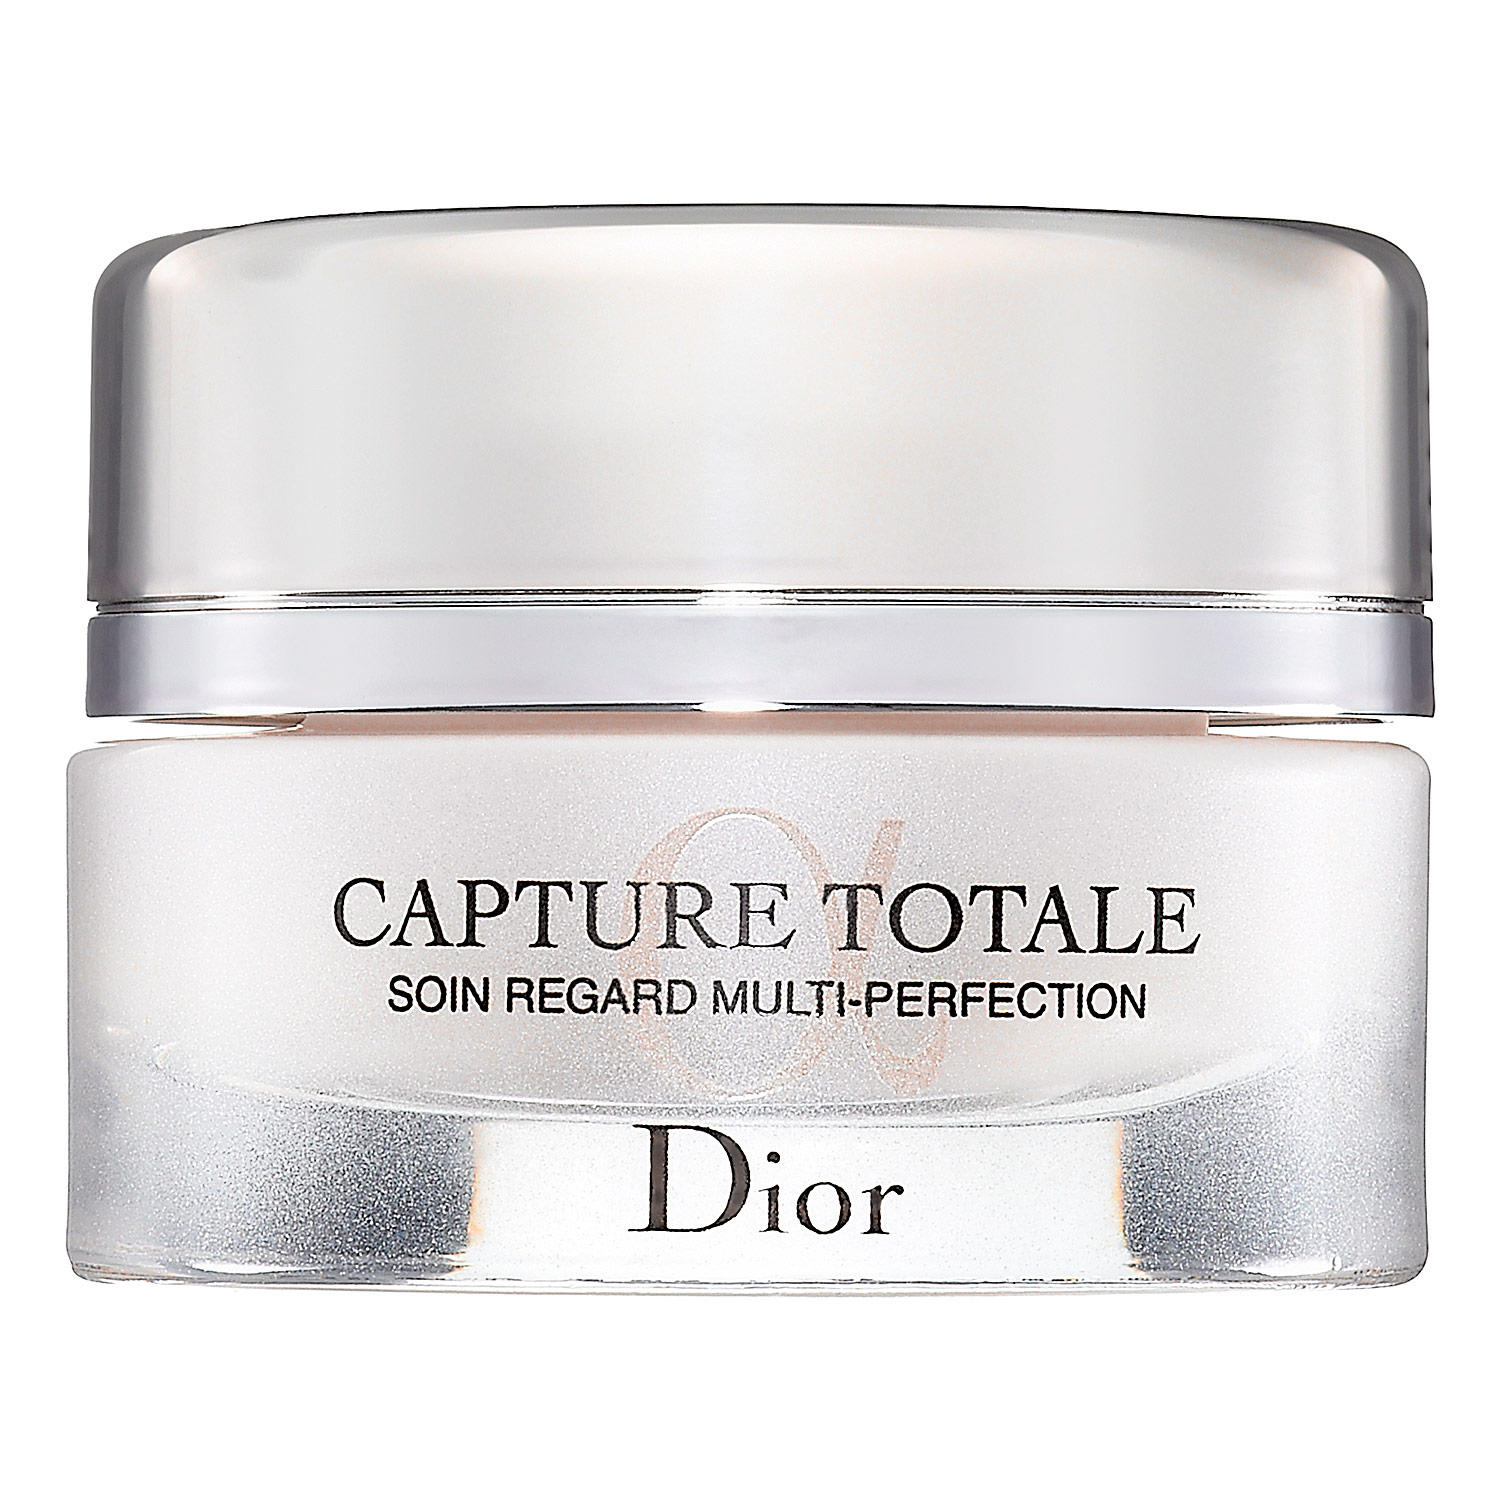 Dior Capture Totale Multi-Perfection Eye Treatment